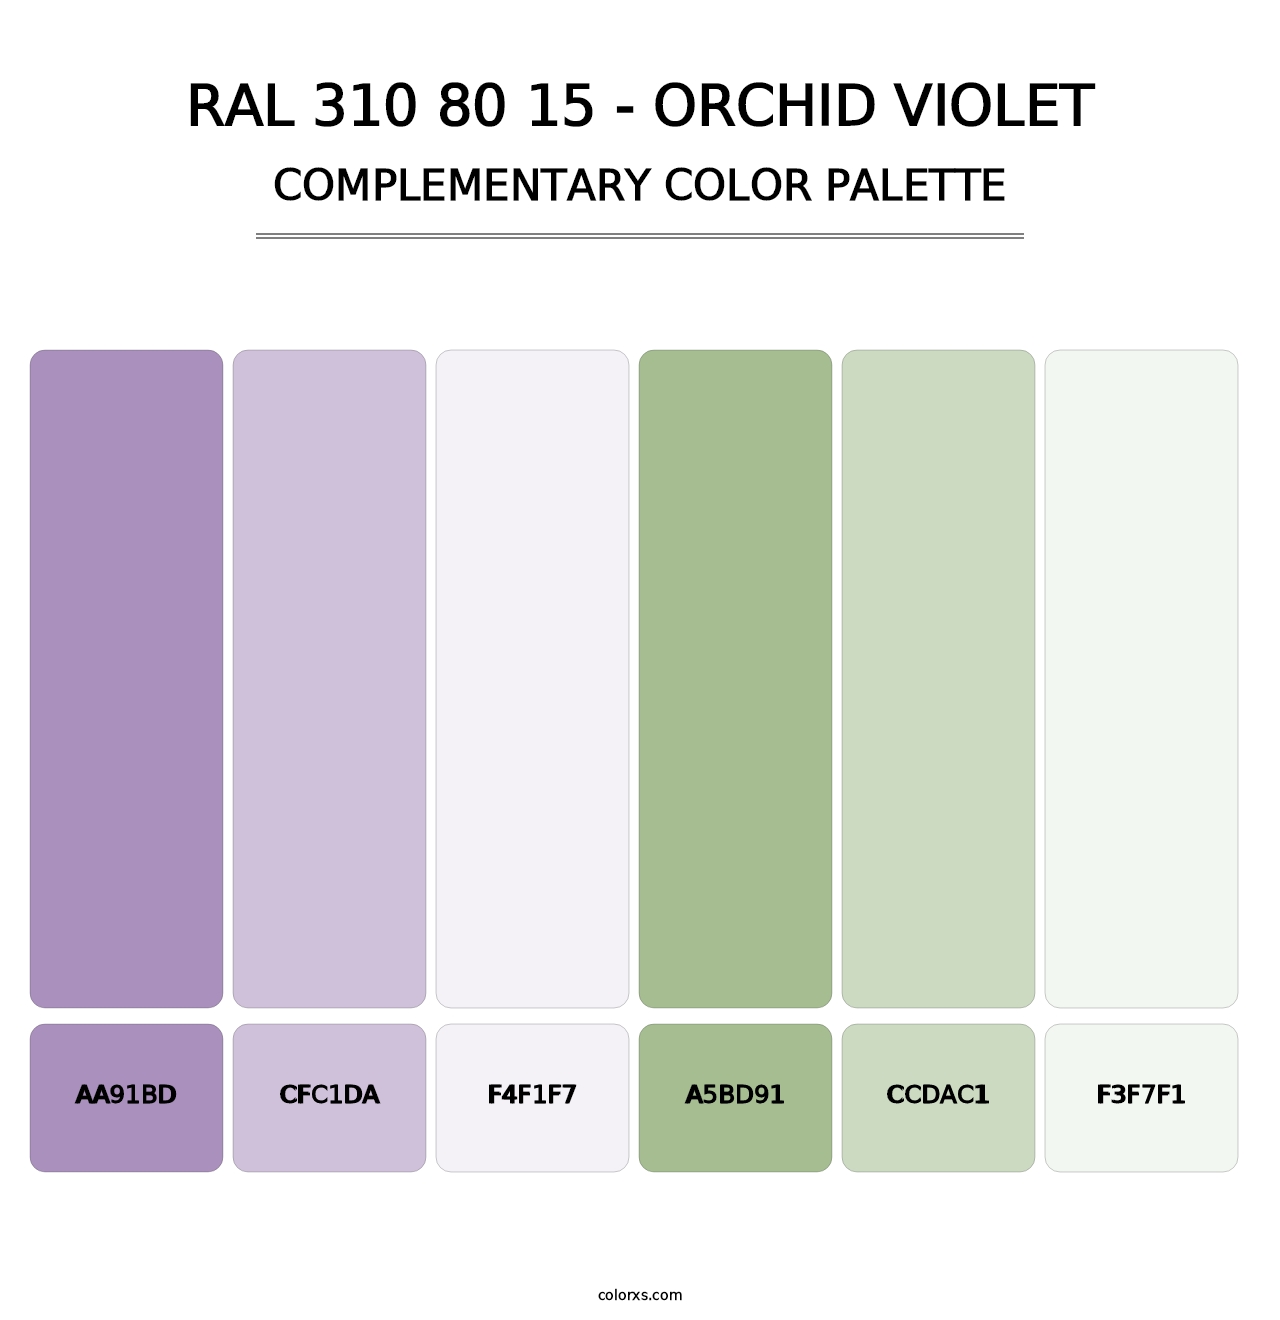 RAL 310 80 15 - Orchid Violet - Complementary Color Palette